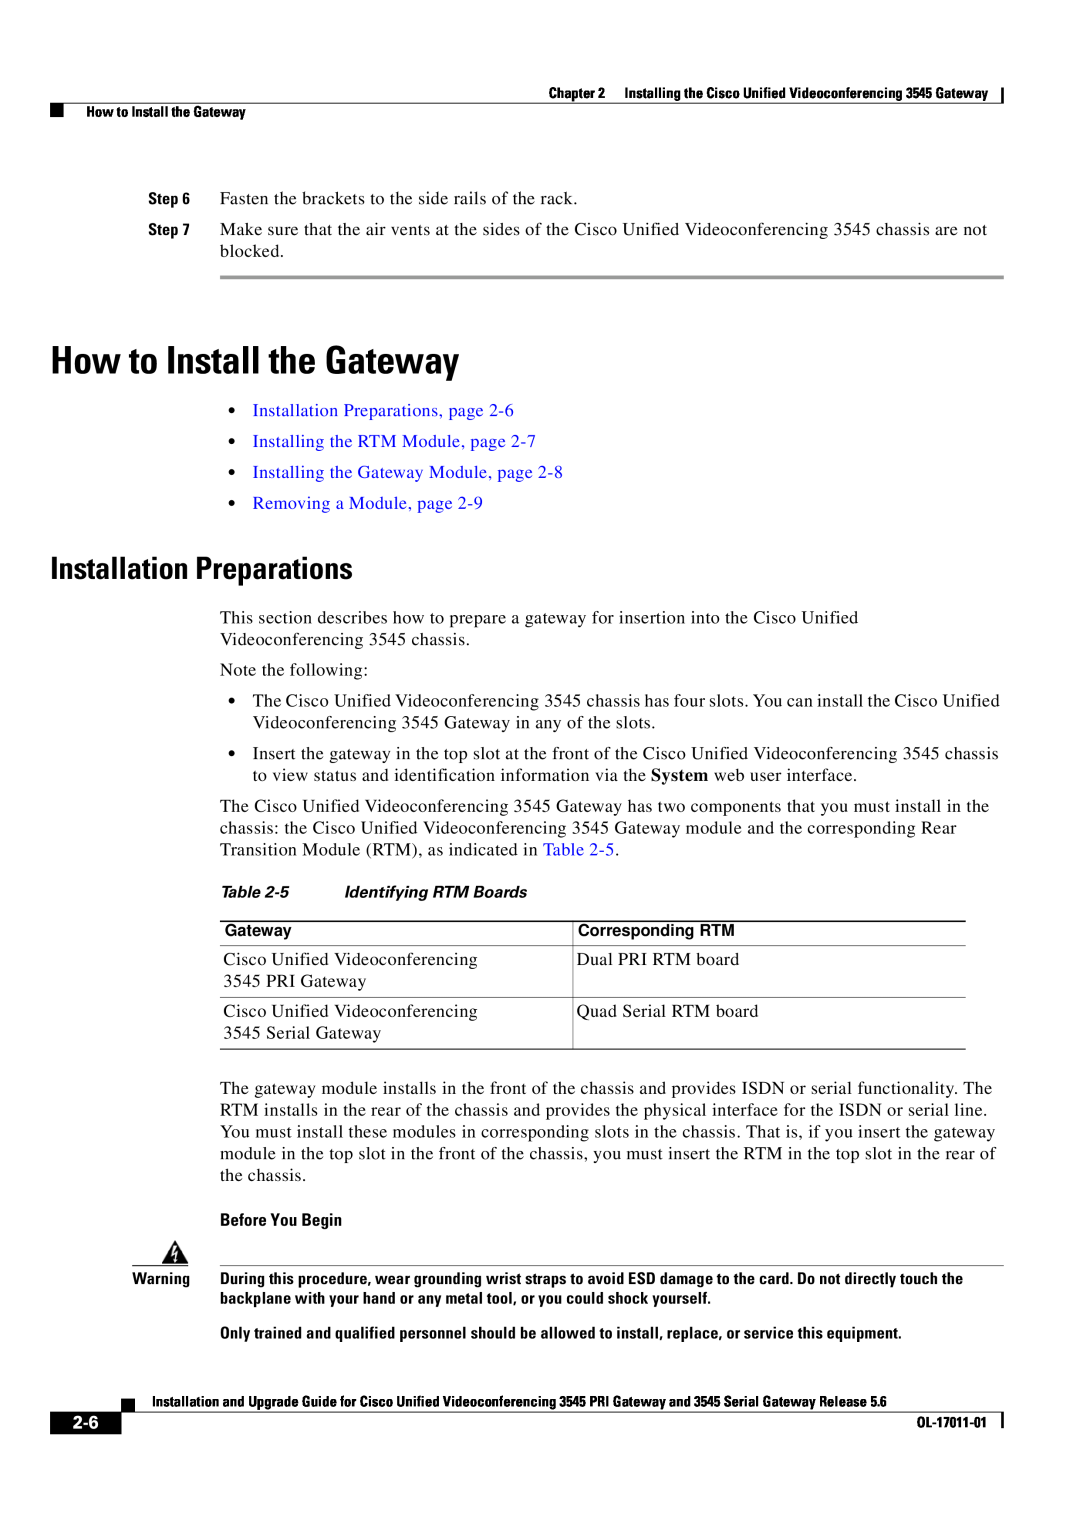 Cisco Systems 3545 PRI, 3545 Serial manual How to Install the Gateway, Installation Preparations 